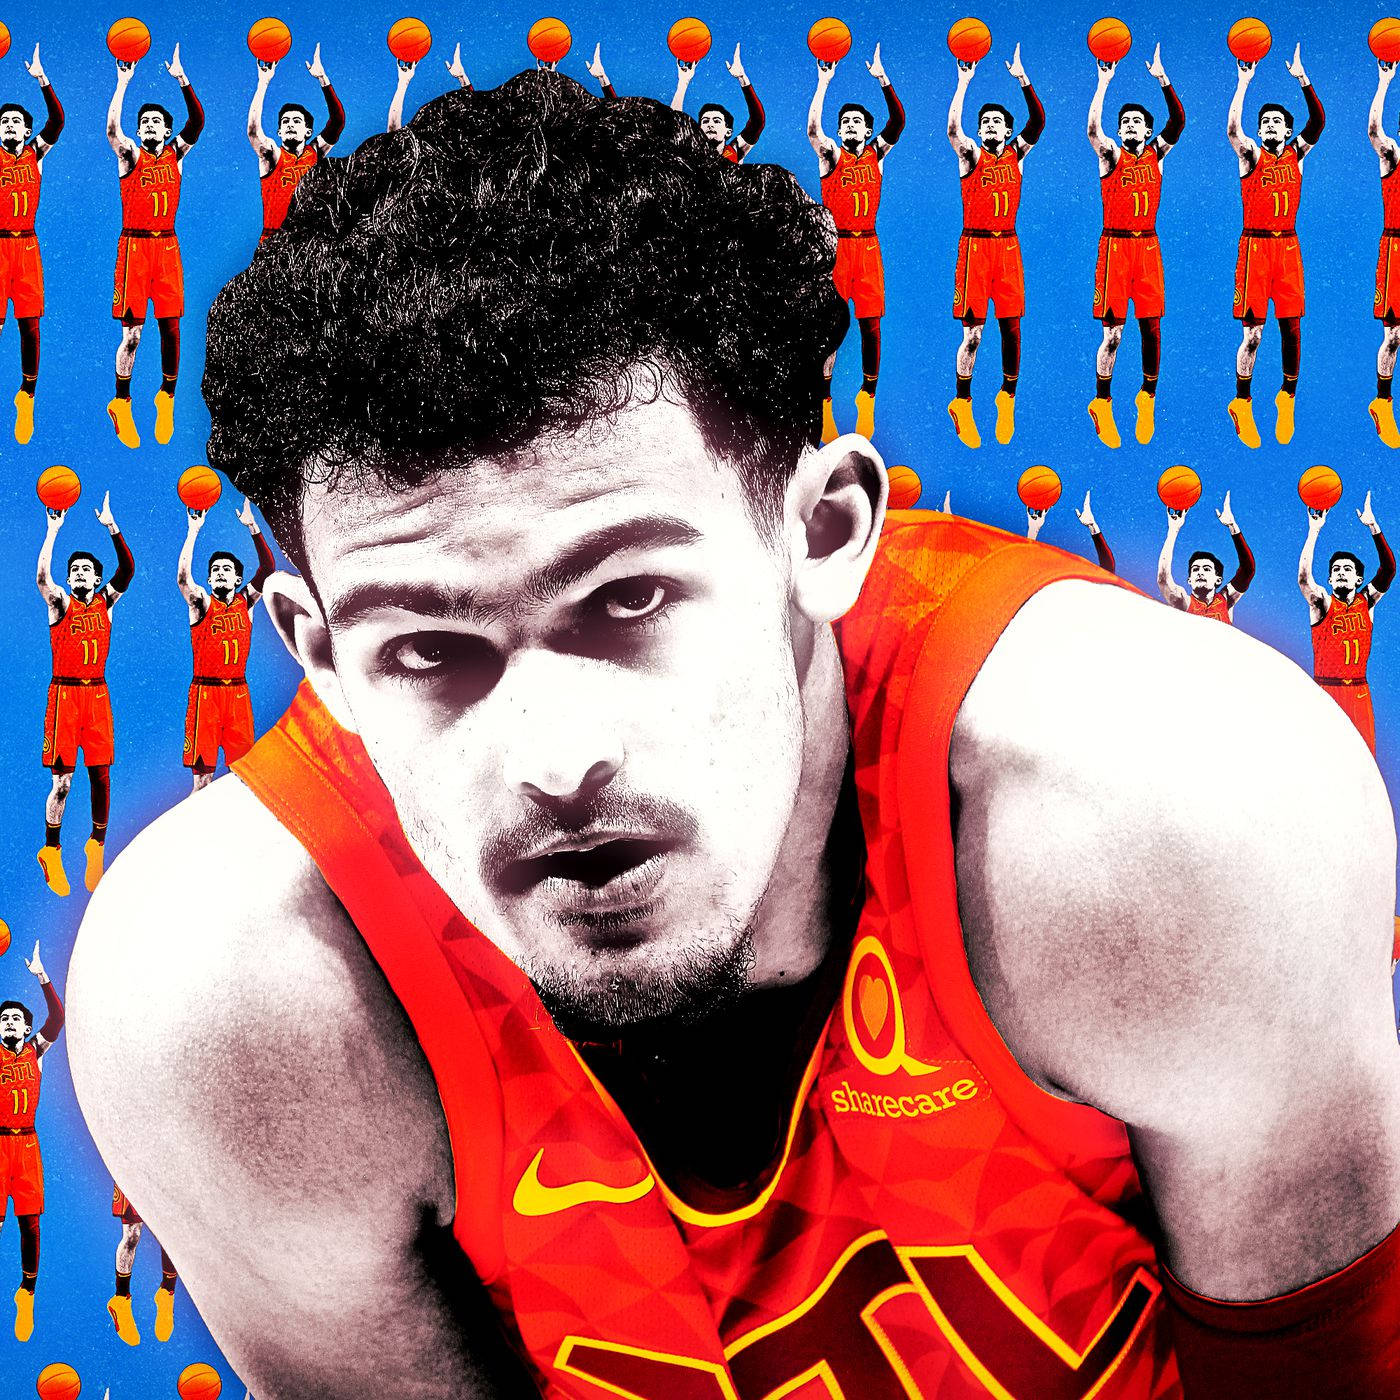 1400X1400 Trae Young Wallpaper and Background